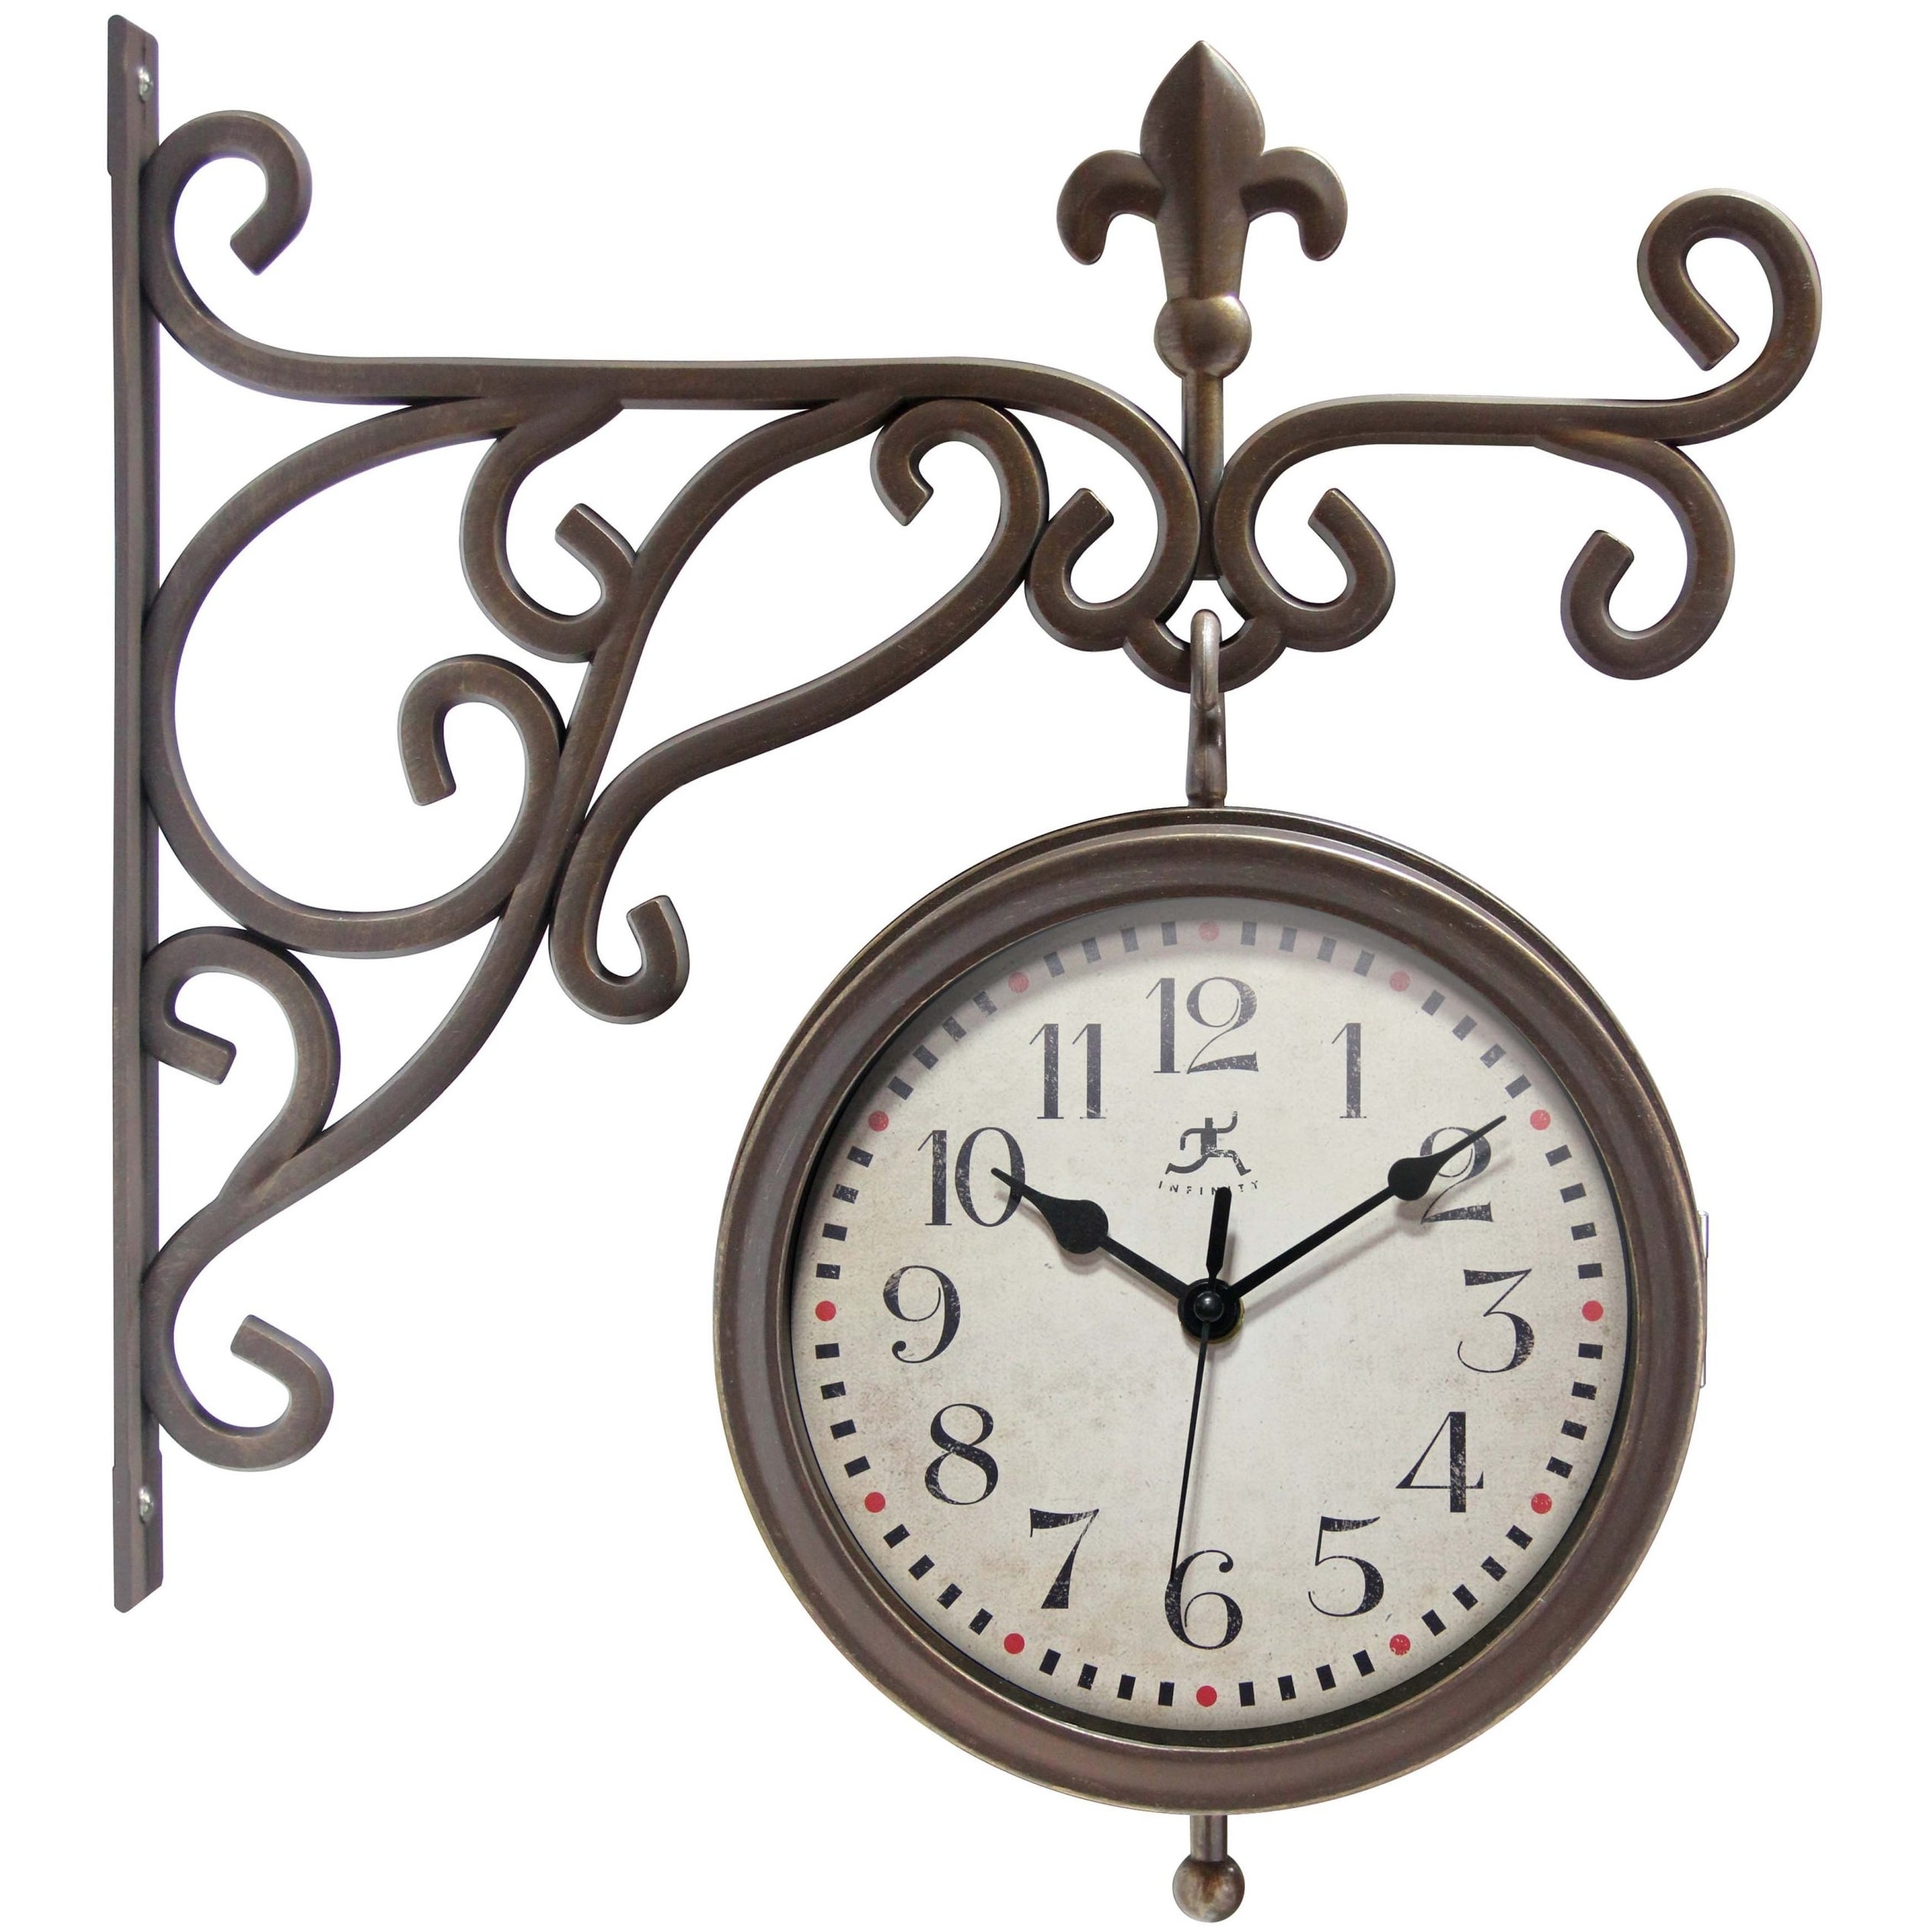 https://ak1.ostkcdn.com/images/products/is/images/direct/bdb9e1f7a4d3adf1f80f641e5ffa7d3b2b457652/Beauregard-Double-Sided-Clock-and-Thermometer-Combo-Outdoor-Clock.jpg